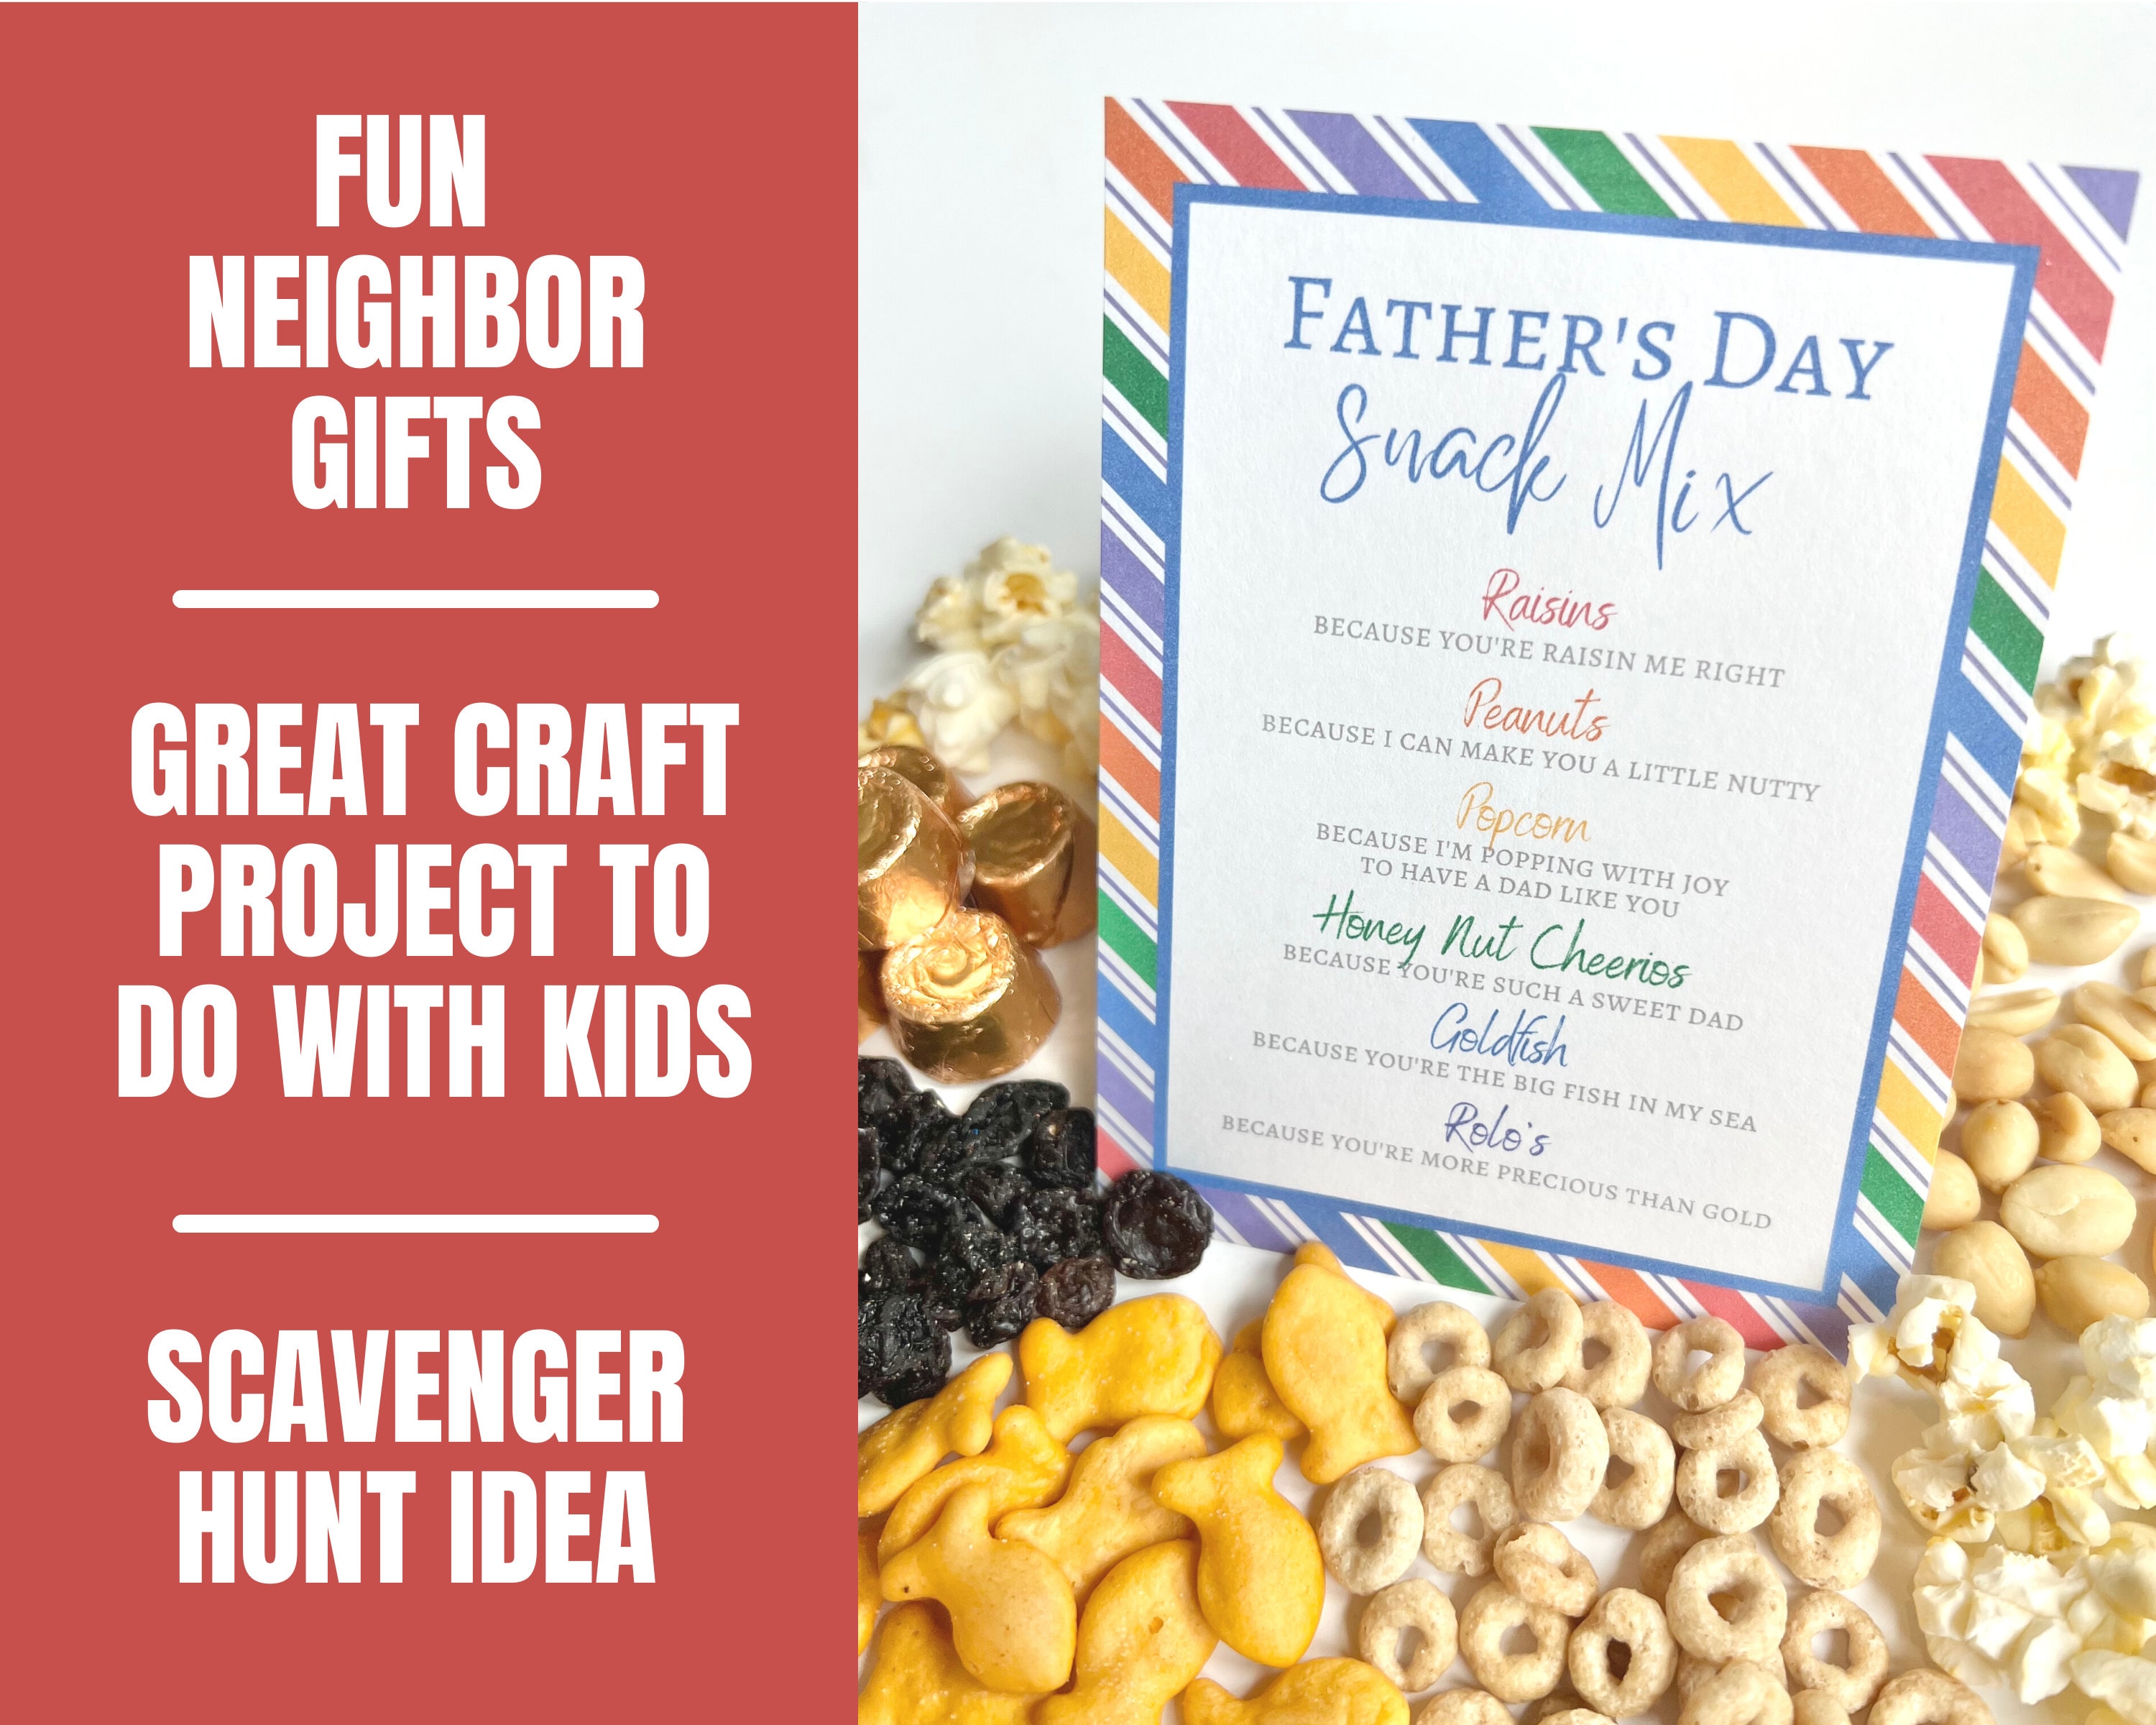 Father's Day Snack Mix Printable Gift Tags, Treat Cards, School & Church  Handouts, Fun Kids Craft Idea or Neighbor Gift 